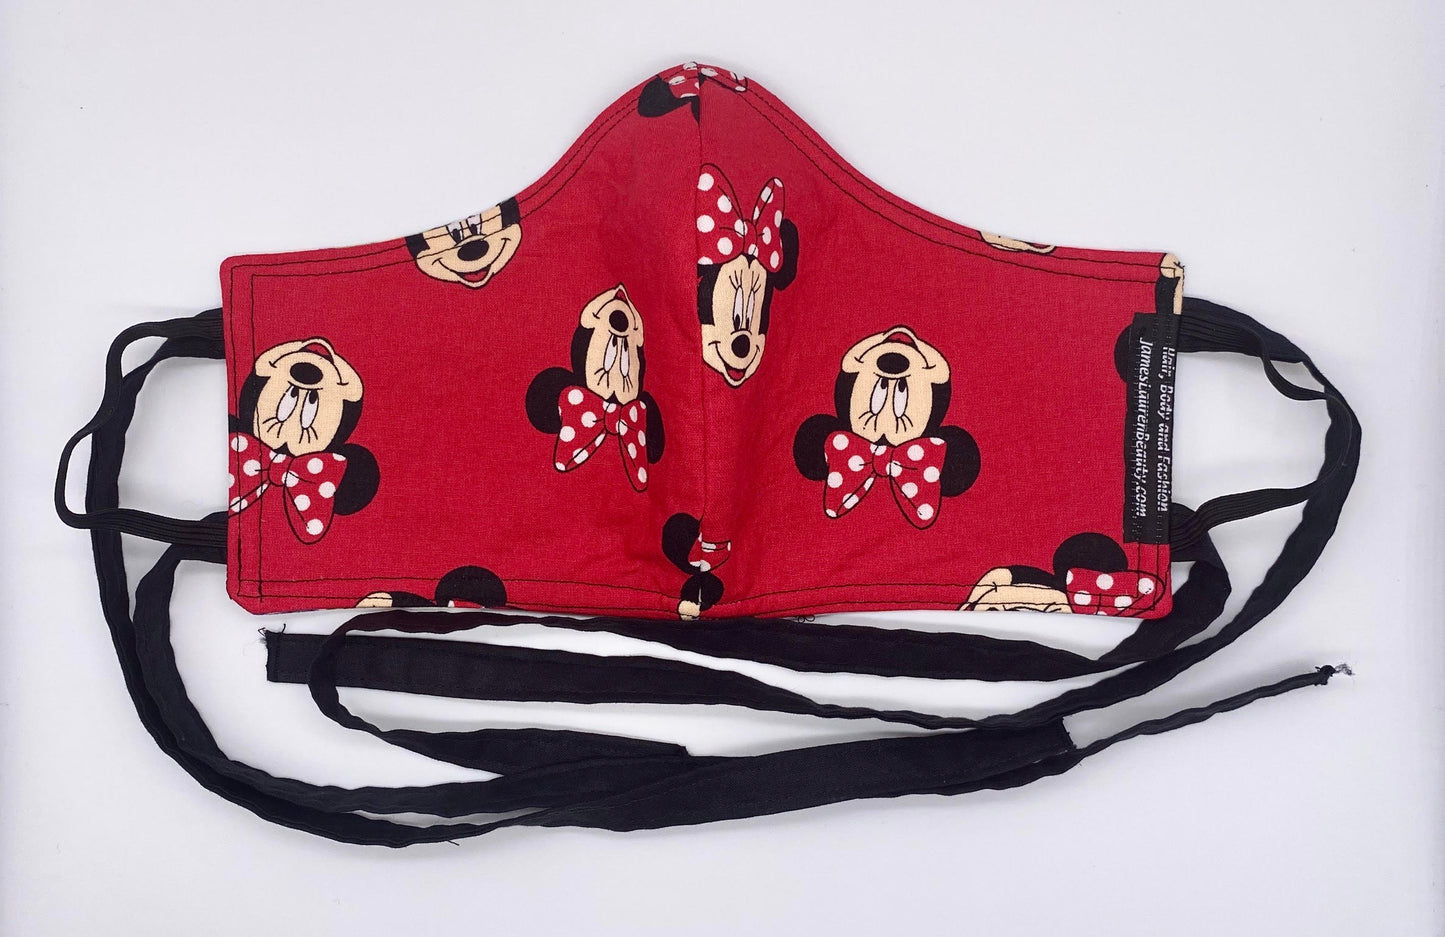 Licensed Print - Minnie Mouse: Contoured Adult Face Masks (One Size Fits Most; Ages 11+)